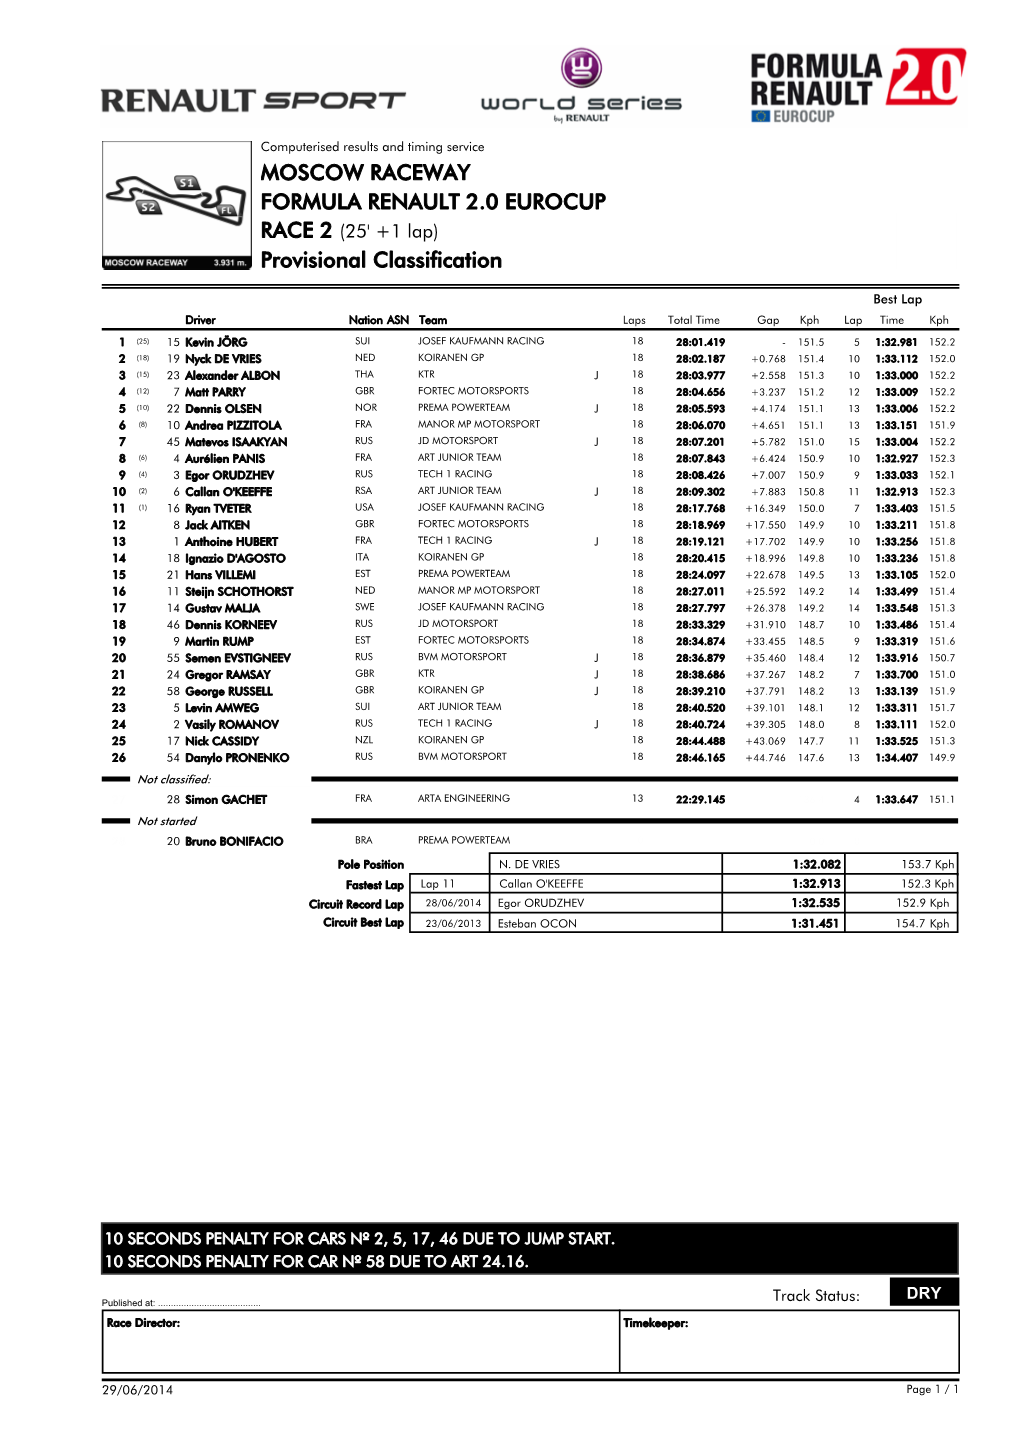 Provisional Classification MOSCOW RACEWAY